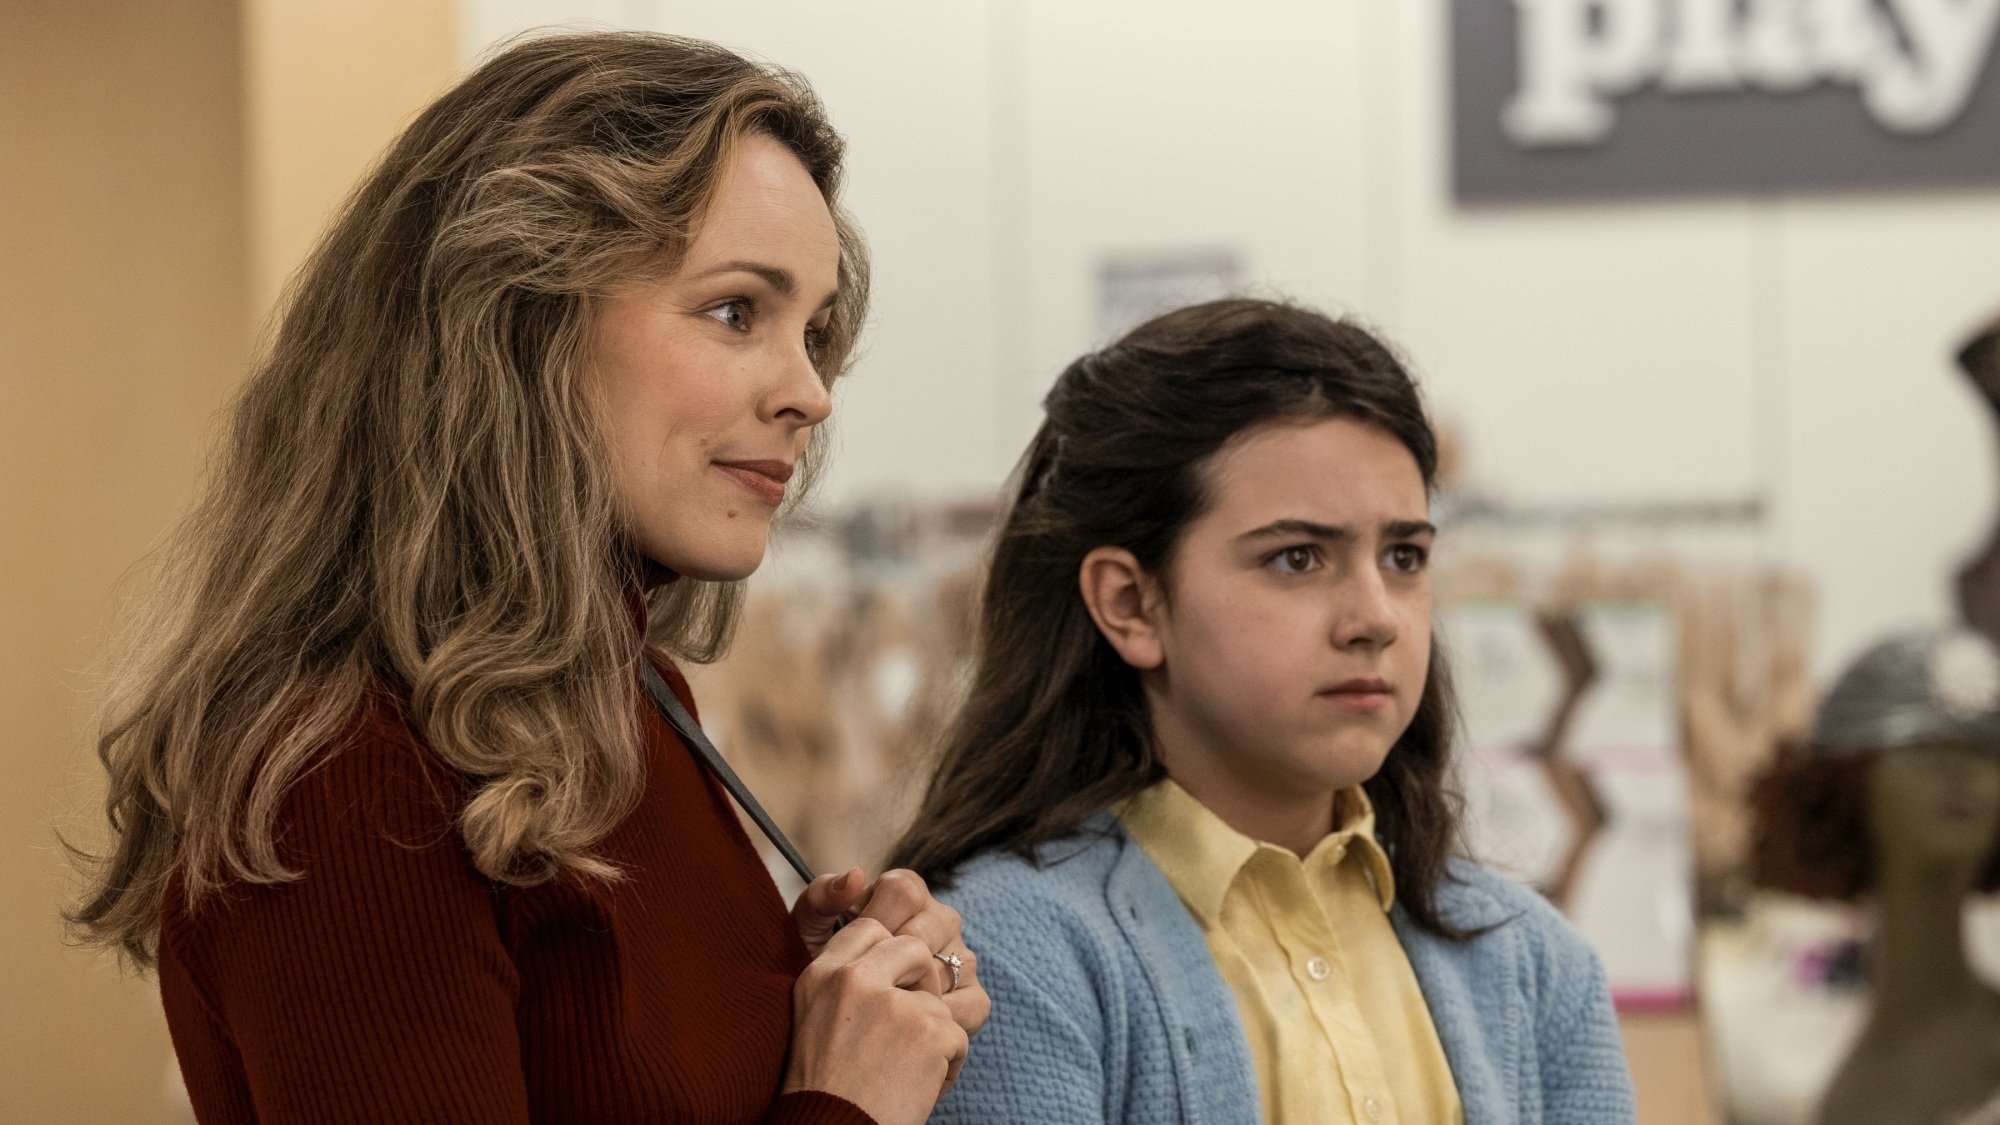 Rachel McAdams and Abby Ryder Fortson in "Are You There God? It's Me, Margaret."